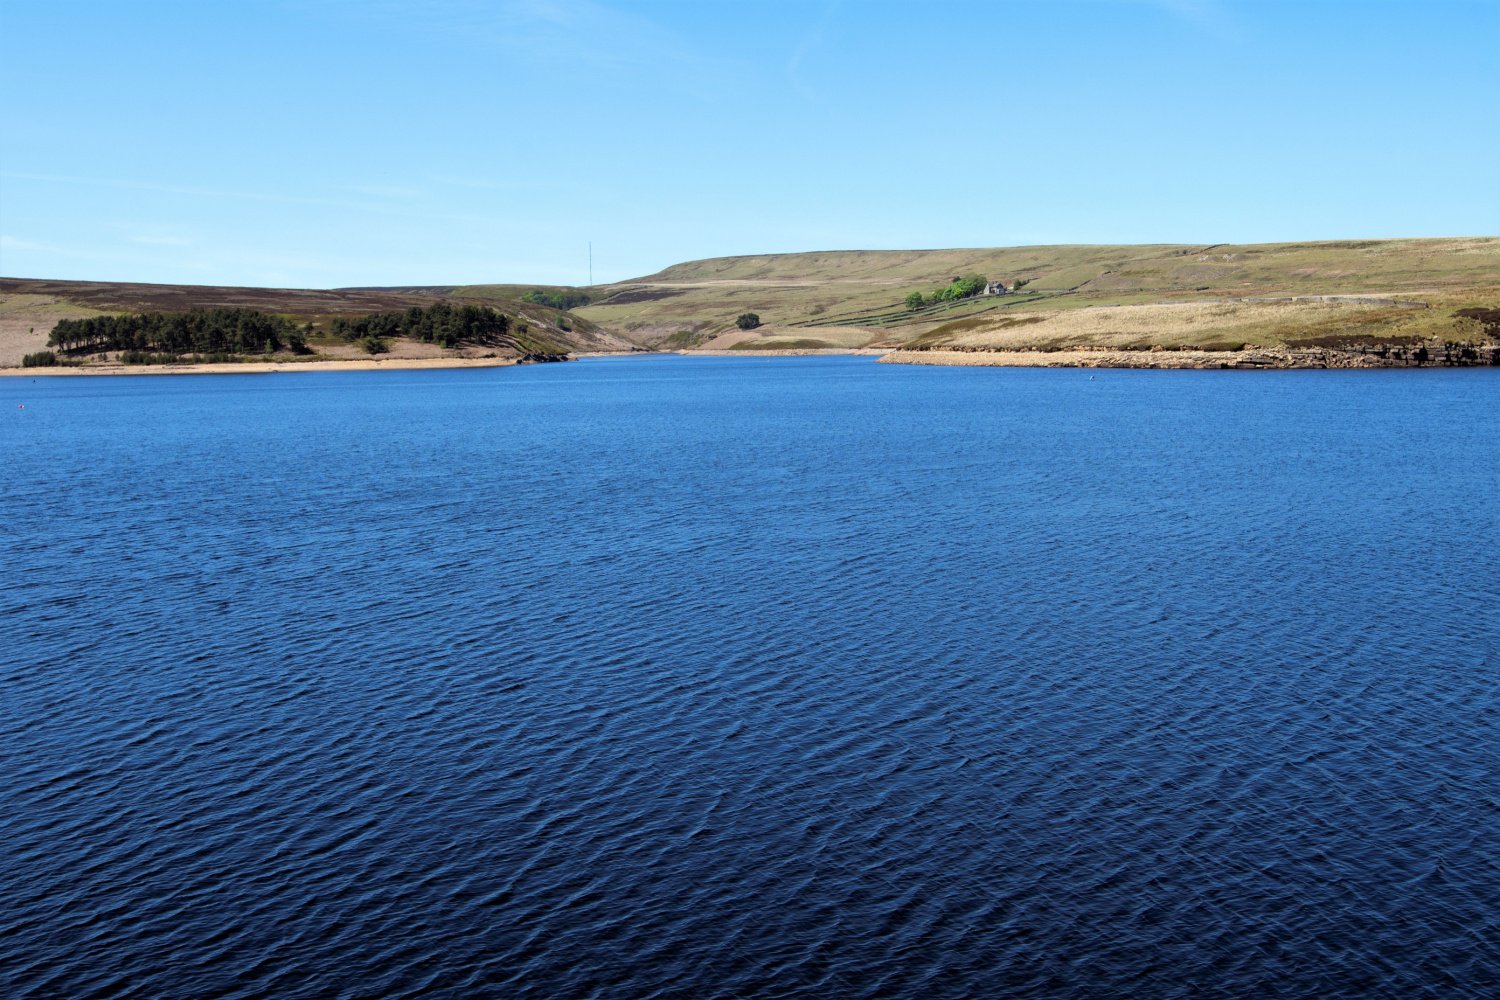 Image name winscar reservoir sheffield south yorkshire the 6 image from the post Walk: Winscar Reservoir in Yorkshire.com.